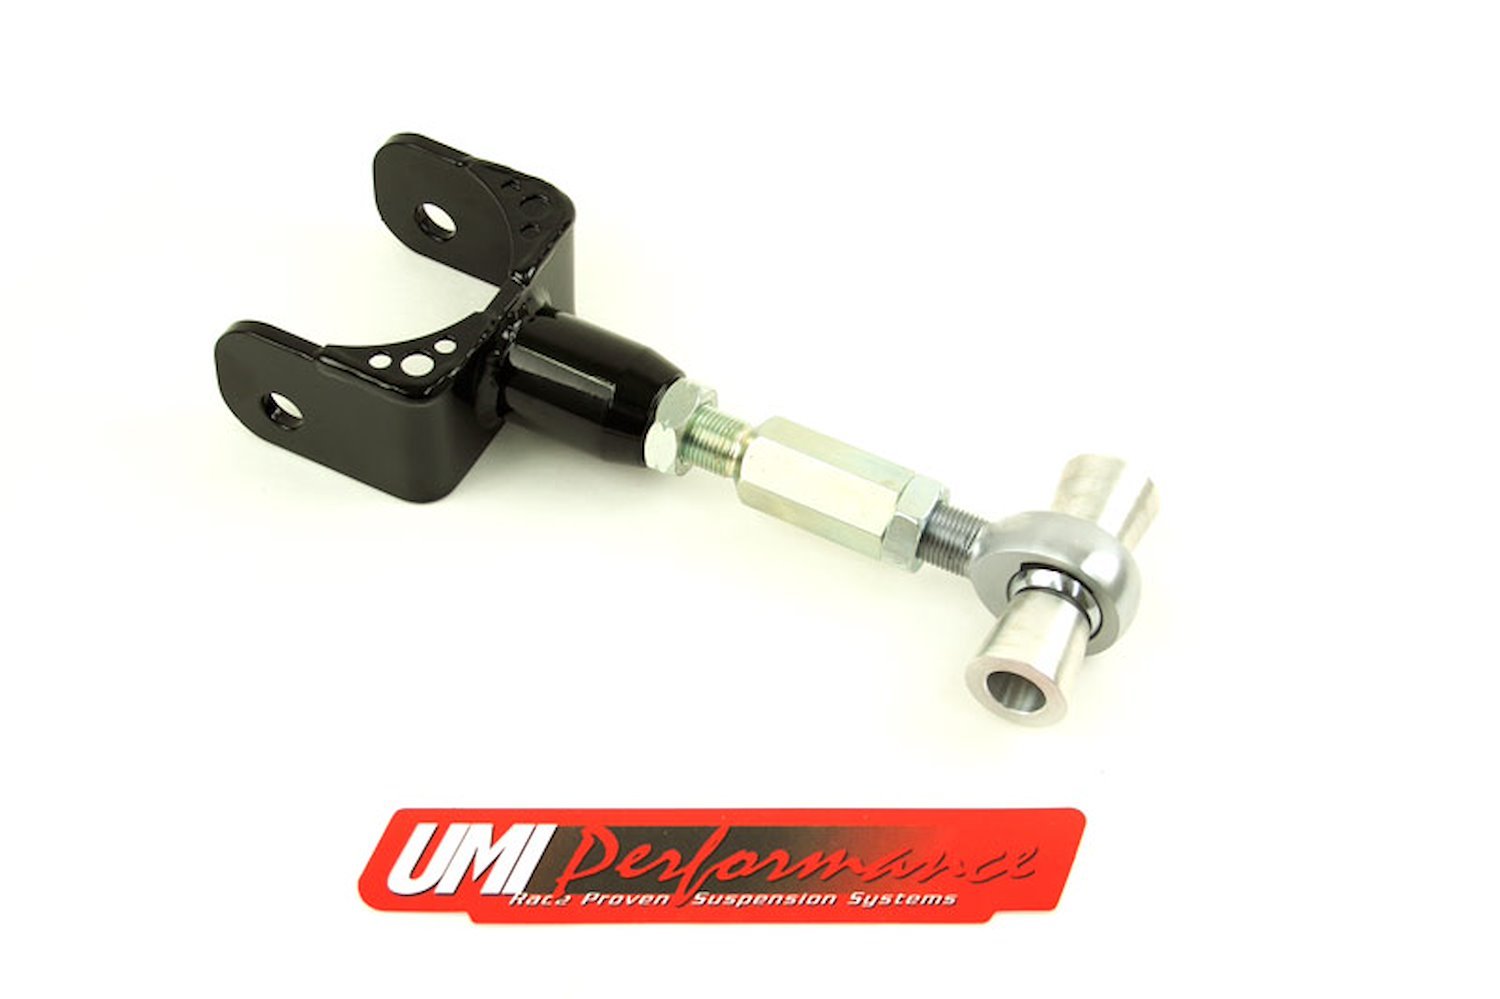 UMI?s adjustable upper rear control arm for the